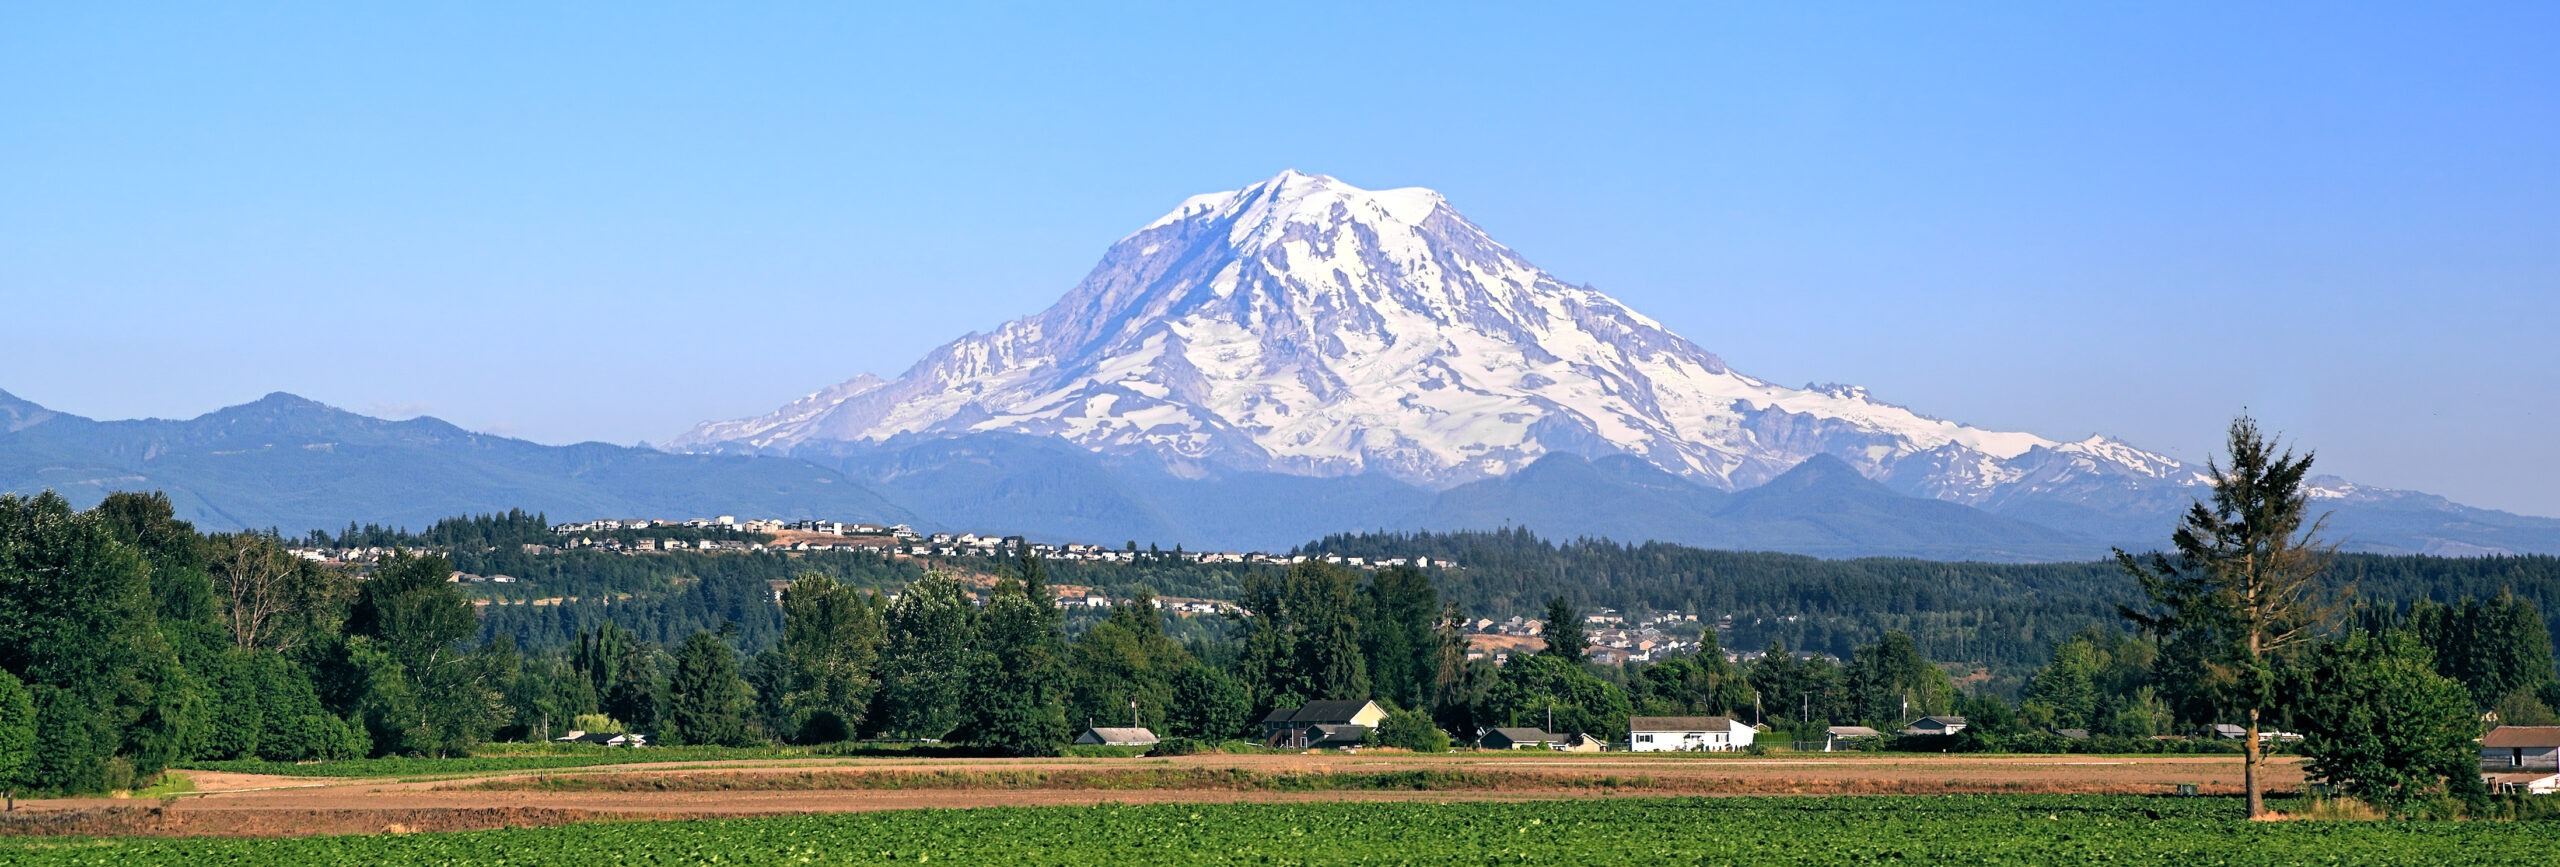 A landscape photo with Mt. Rainier looming prominently in the background.